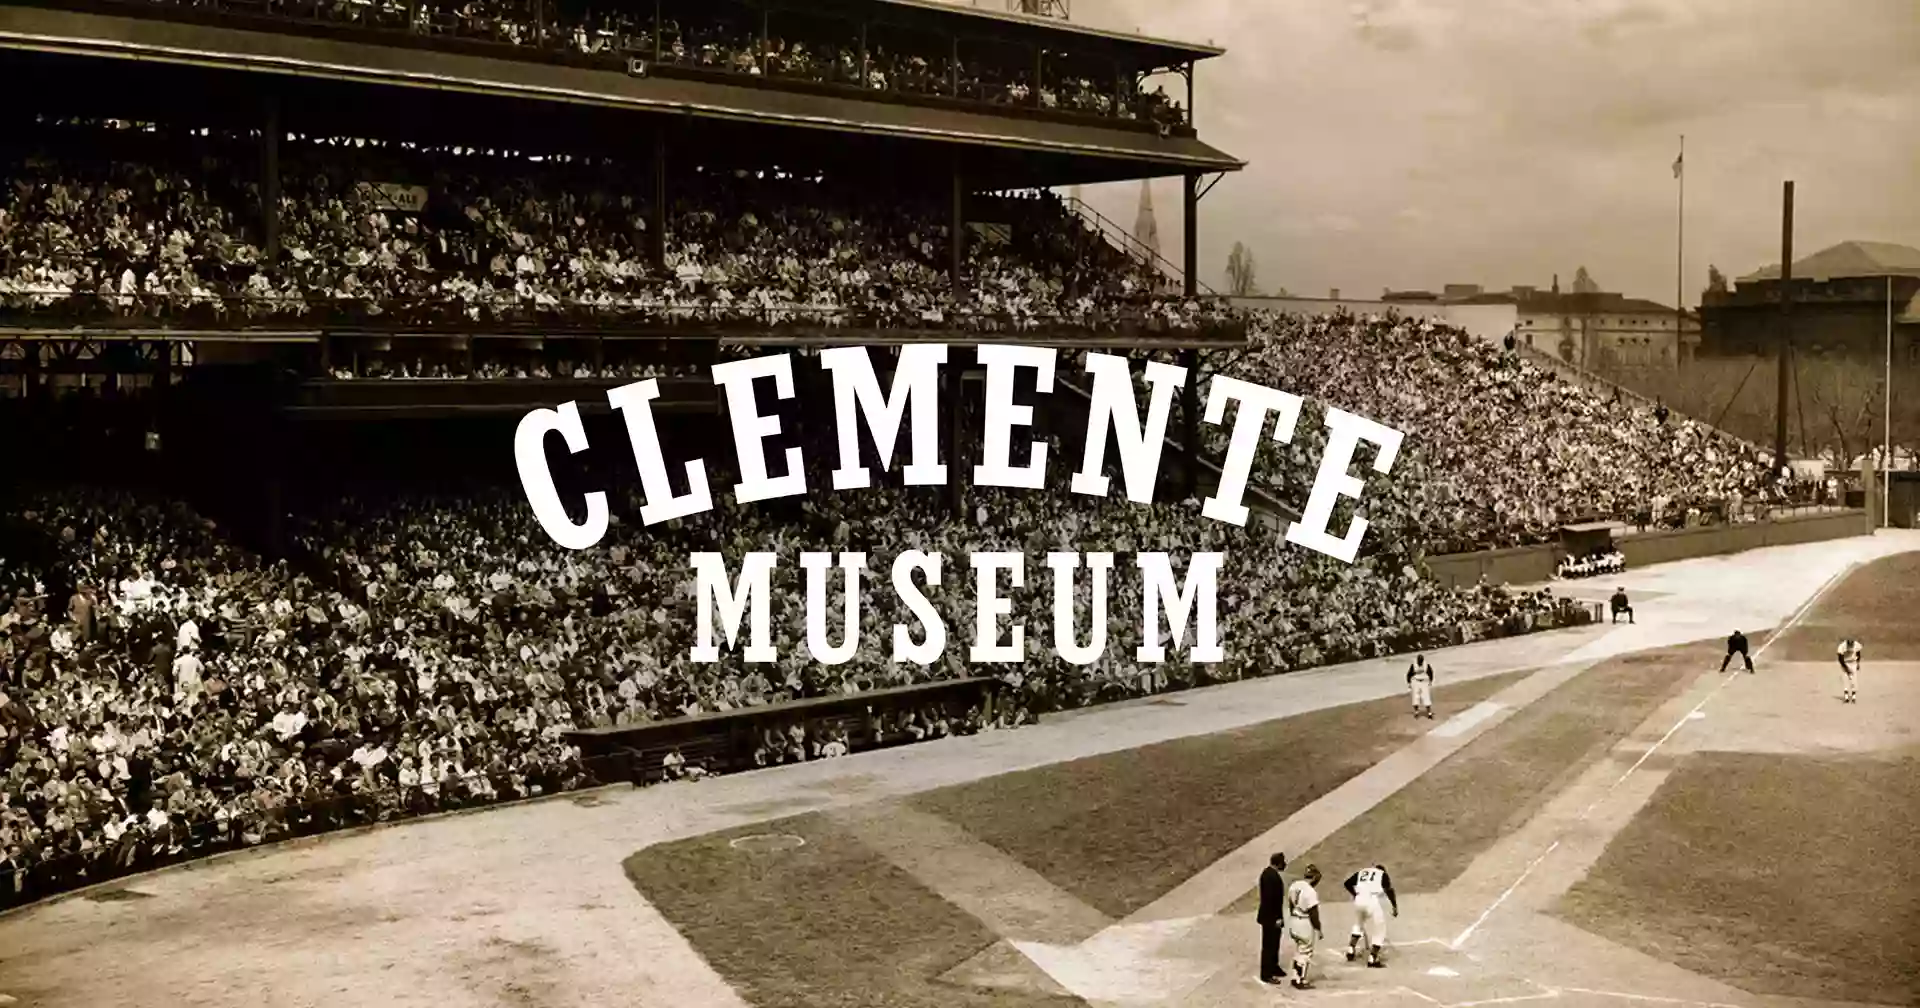 The Clemente Museum